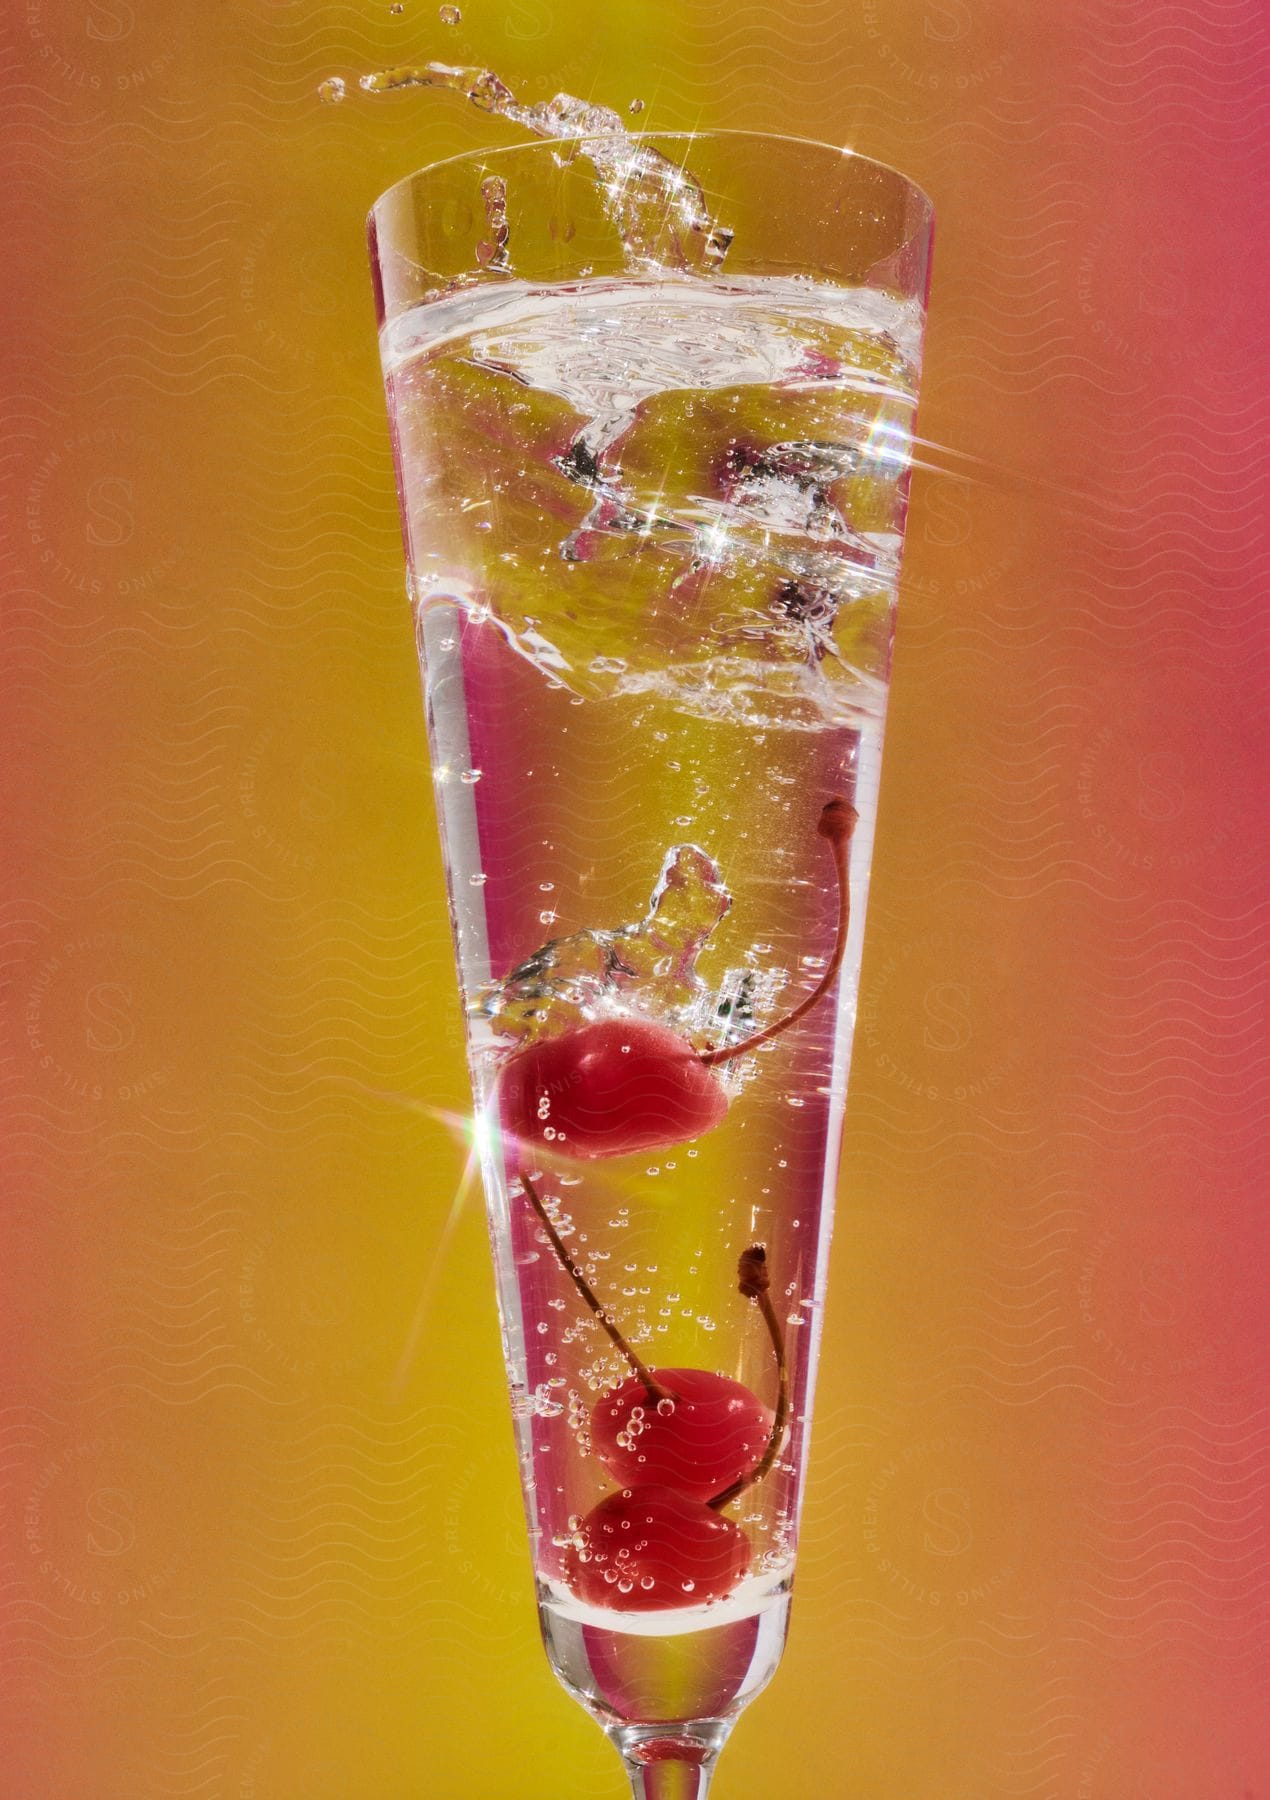 Three cherries with stems dropping into a tall glass of sparkling liquid, creating dynamic splashes, against a gradient yellow to pink background.